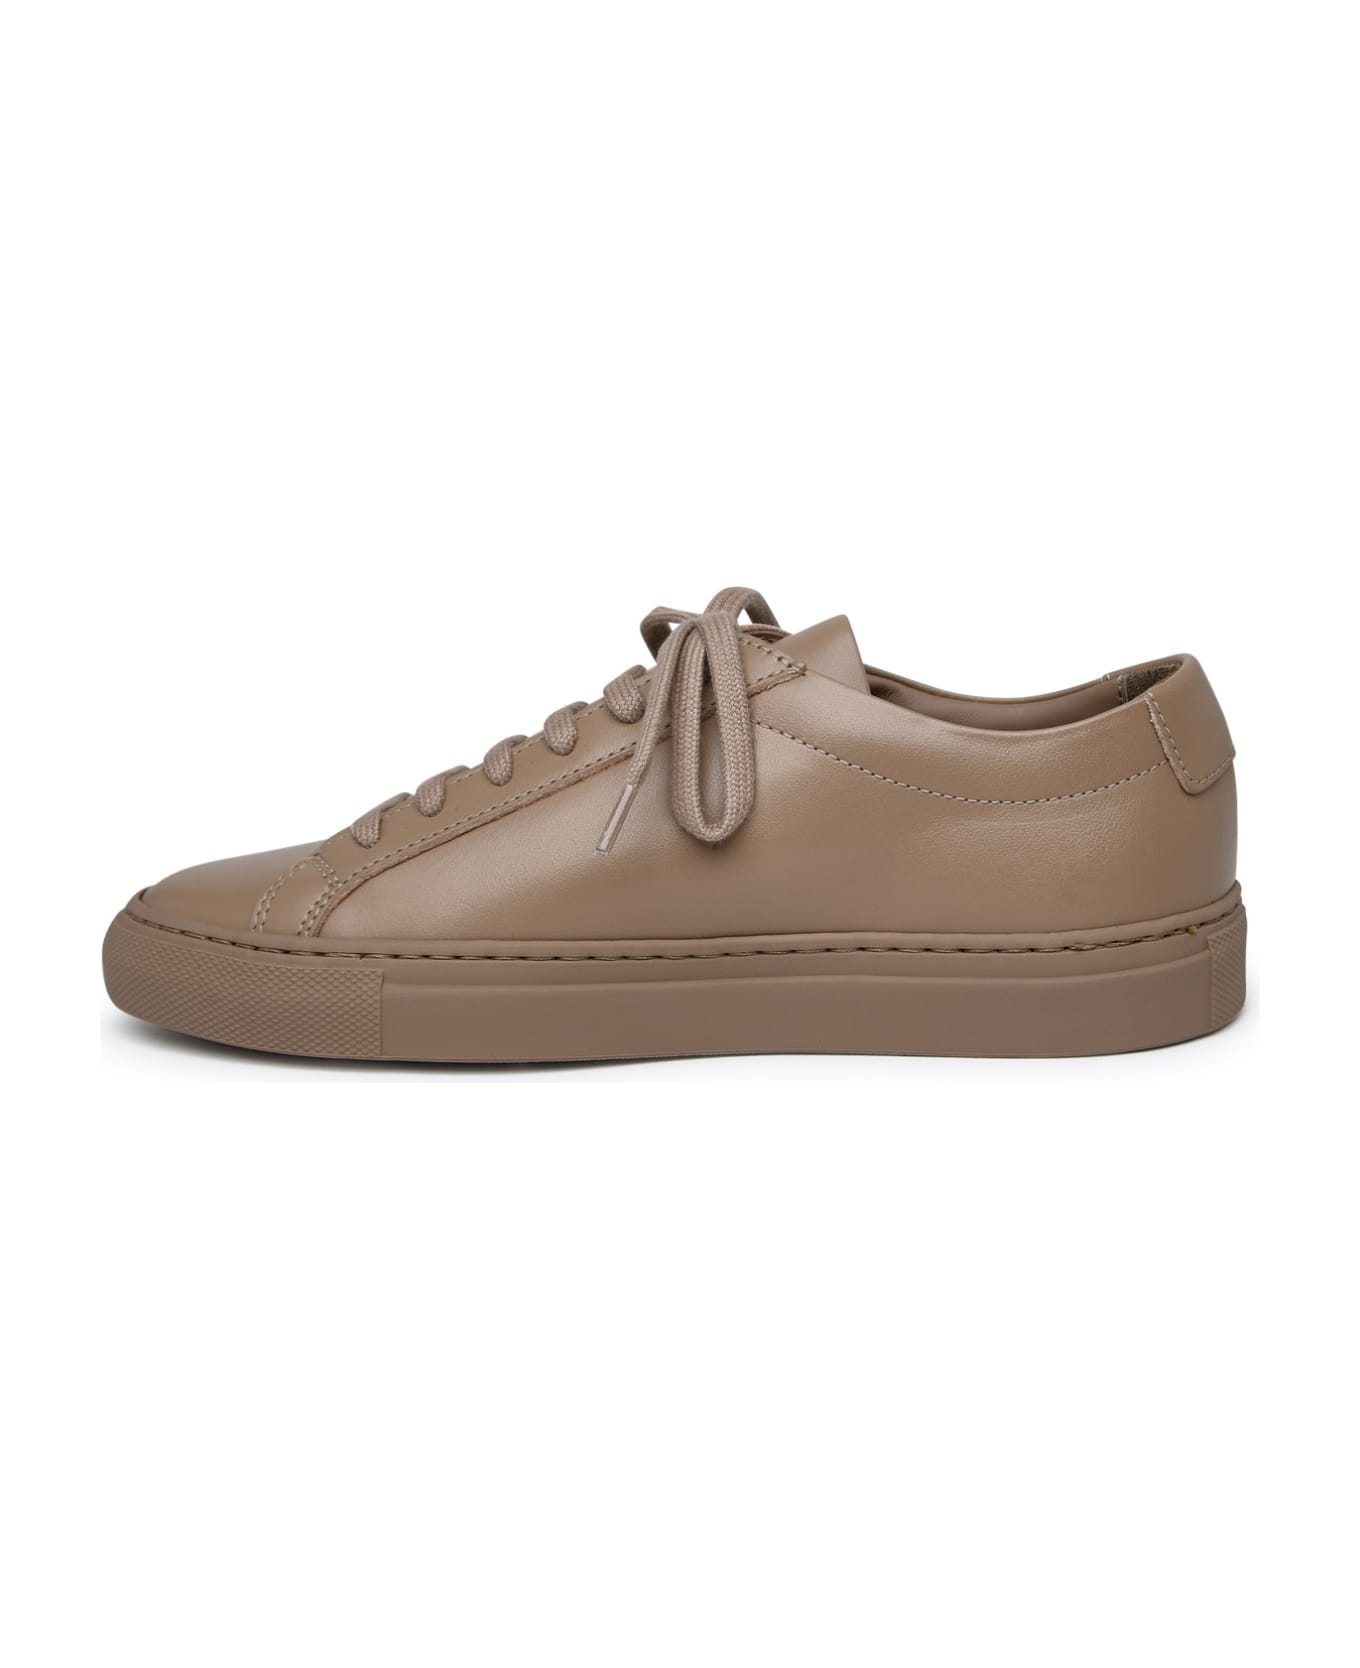 Common Projects Achilles Beige Leather Sneakers - Beige